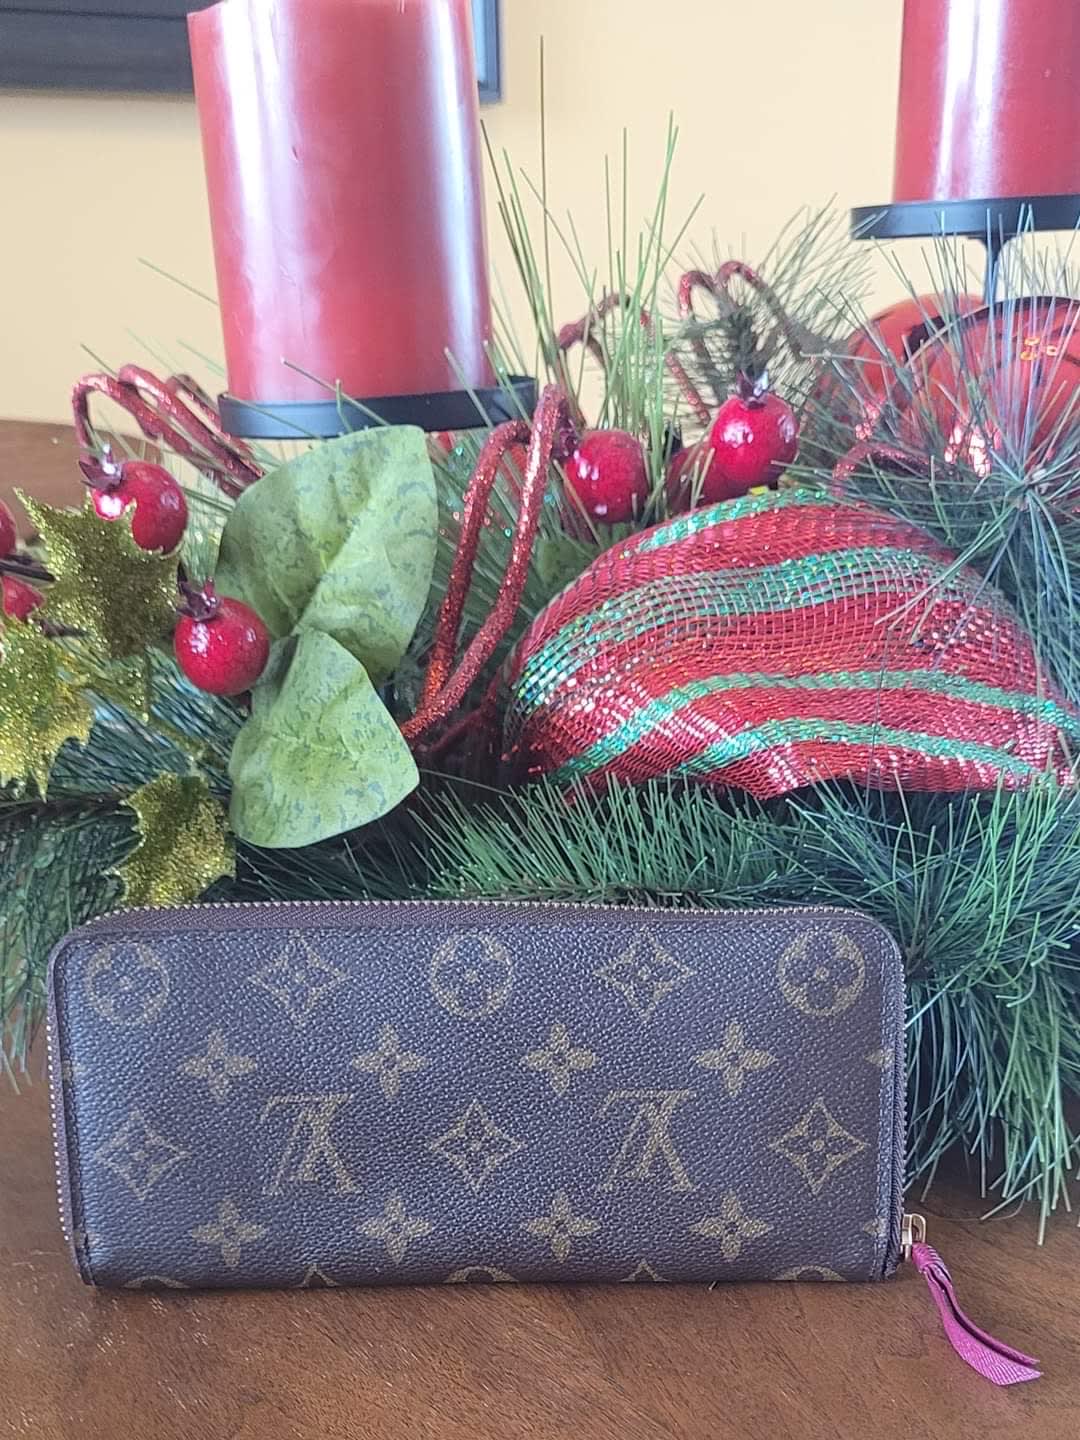 Louis Vuitton Sarah Wallet in Monogram and Fuchsia. LOVE how neat and  organized this…